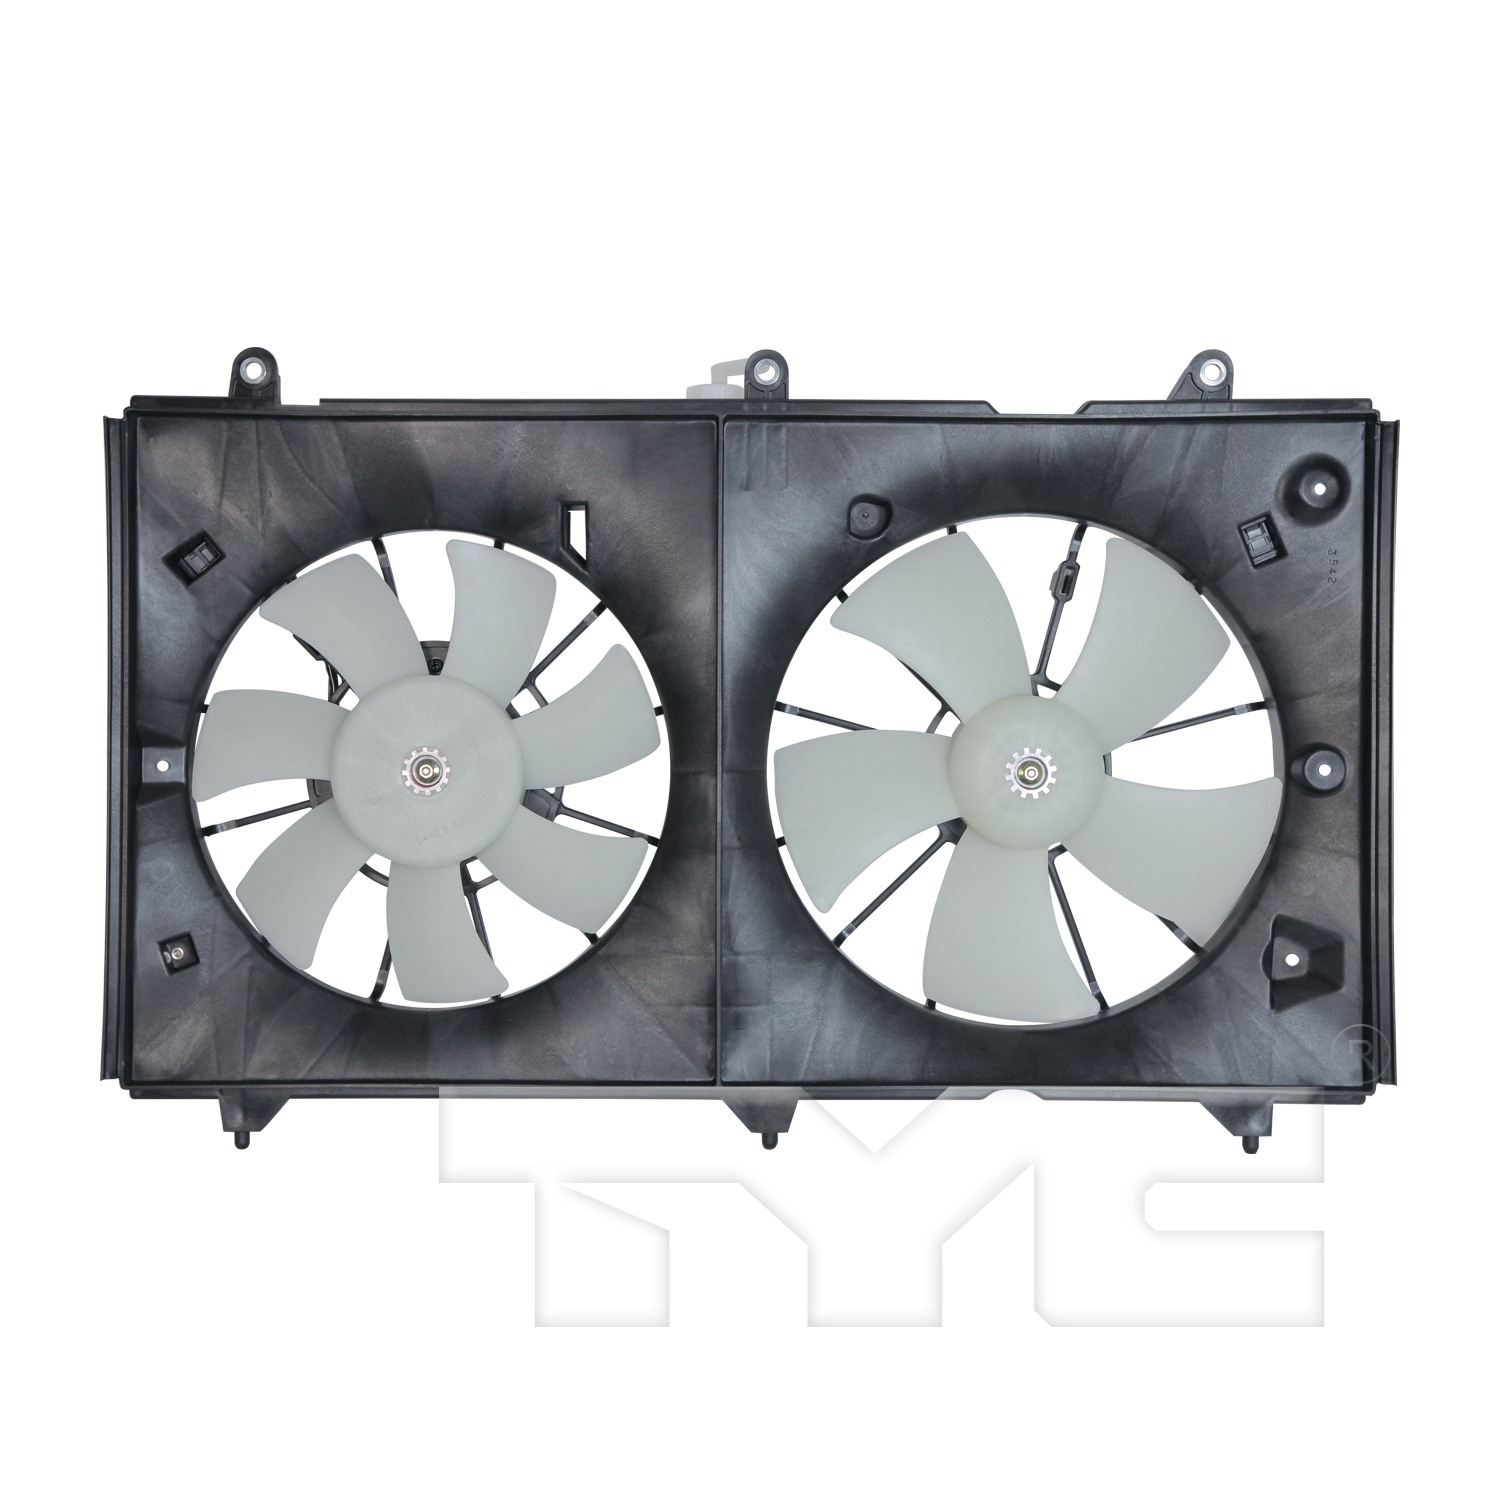 Aftermarket FAN ASSEMBLY/FAN SHROUDS for HONDA - ACCORD, ACCORD,03-05,Radiator cooling fan assy